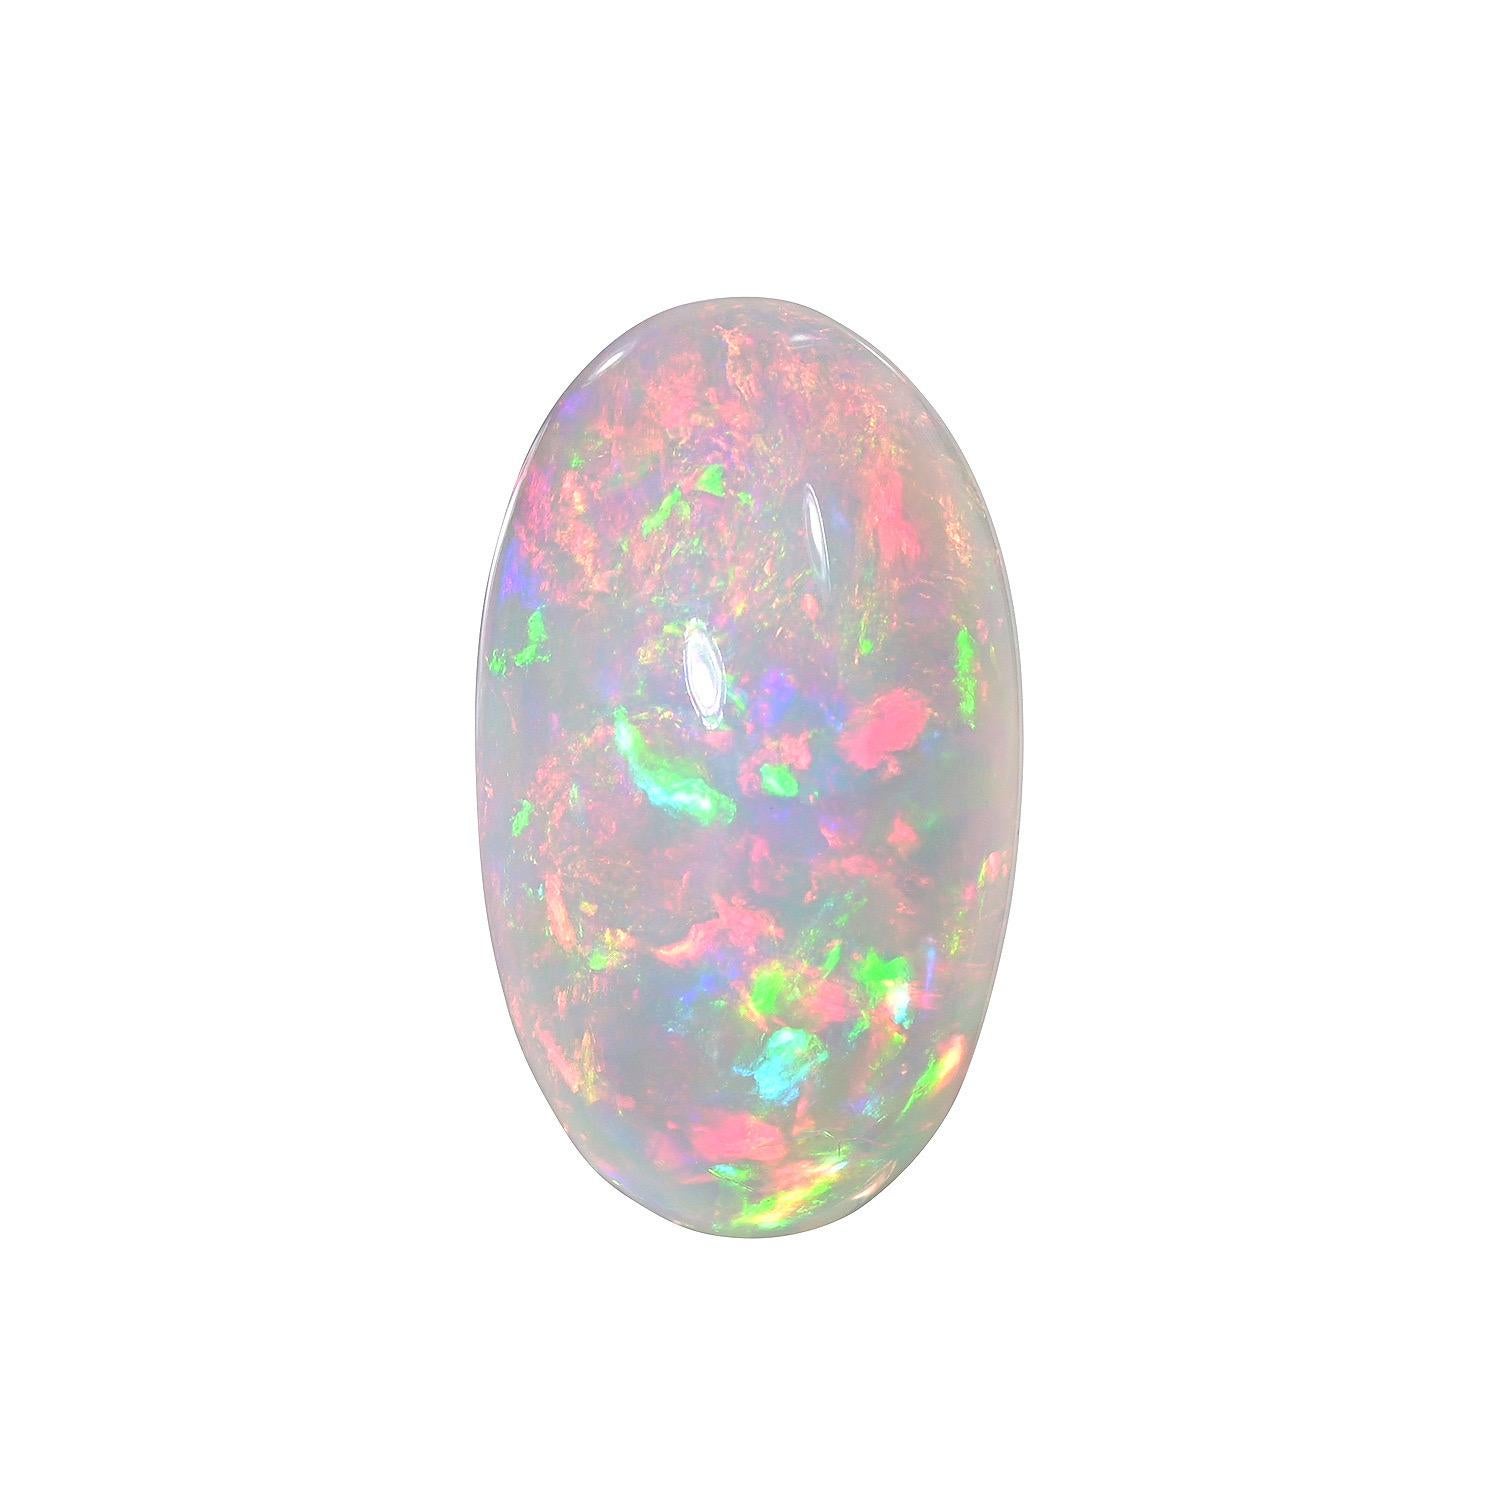 Natural 10.96 carat oval Ethiopian Opal loose gemstone, offered unmounted to a fine gem lover.
Returns are accepted and paid by us within 7 days of delivery.
We offer supreme custom jewelry work upon request. Please contact us for more details.
For